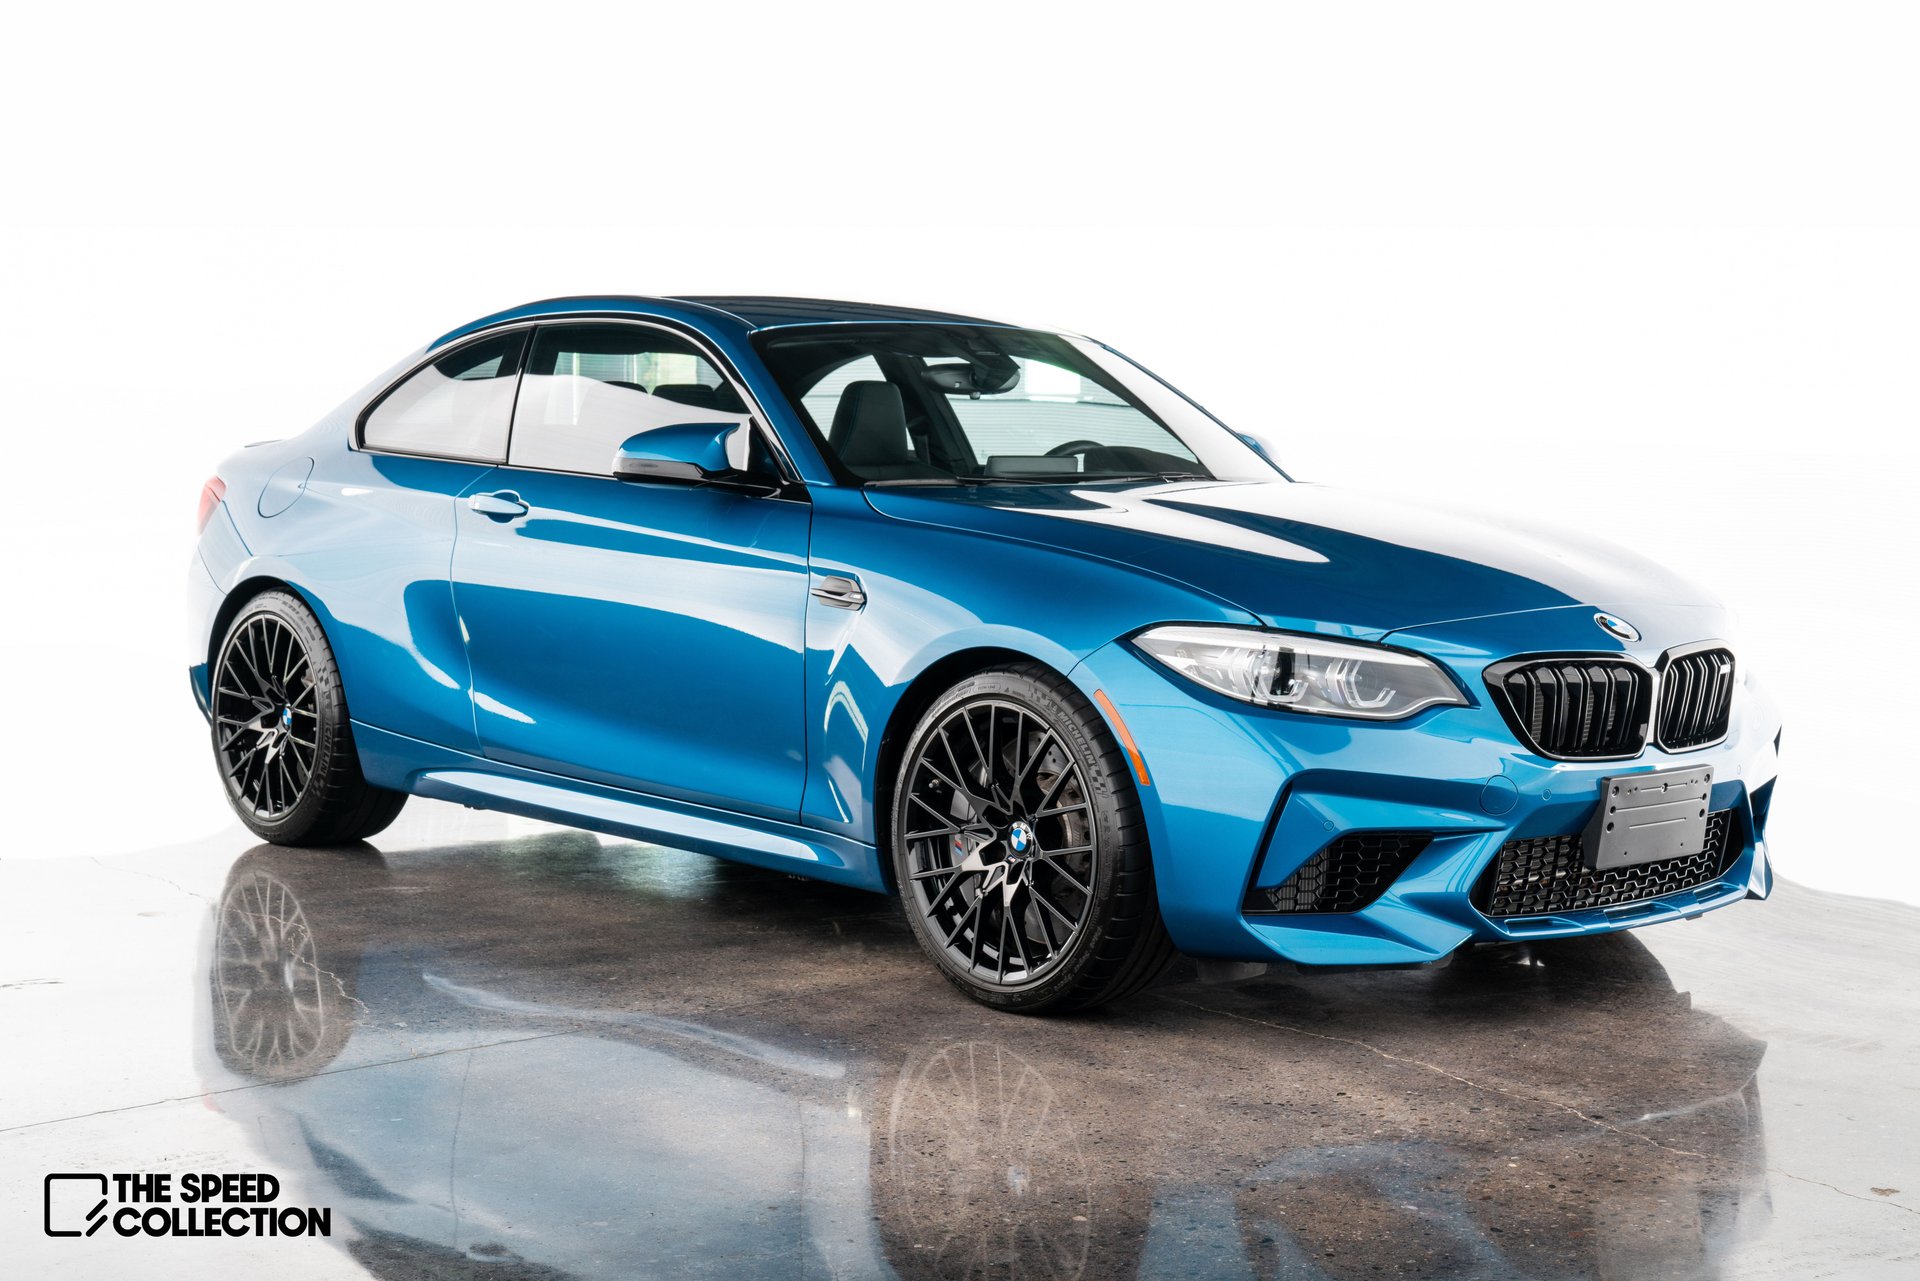 https://cdn.dealeraccelerate.com/speedcollection/1/47/1420/1920x1440/2020-bmw-m2-competition-coupe